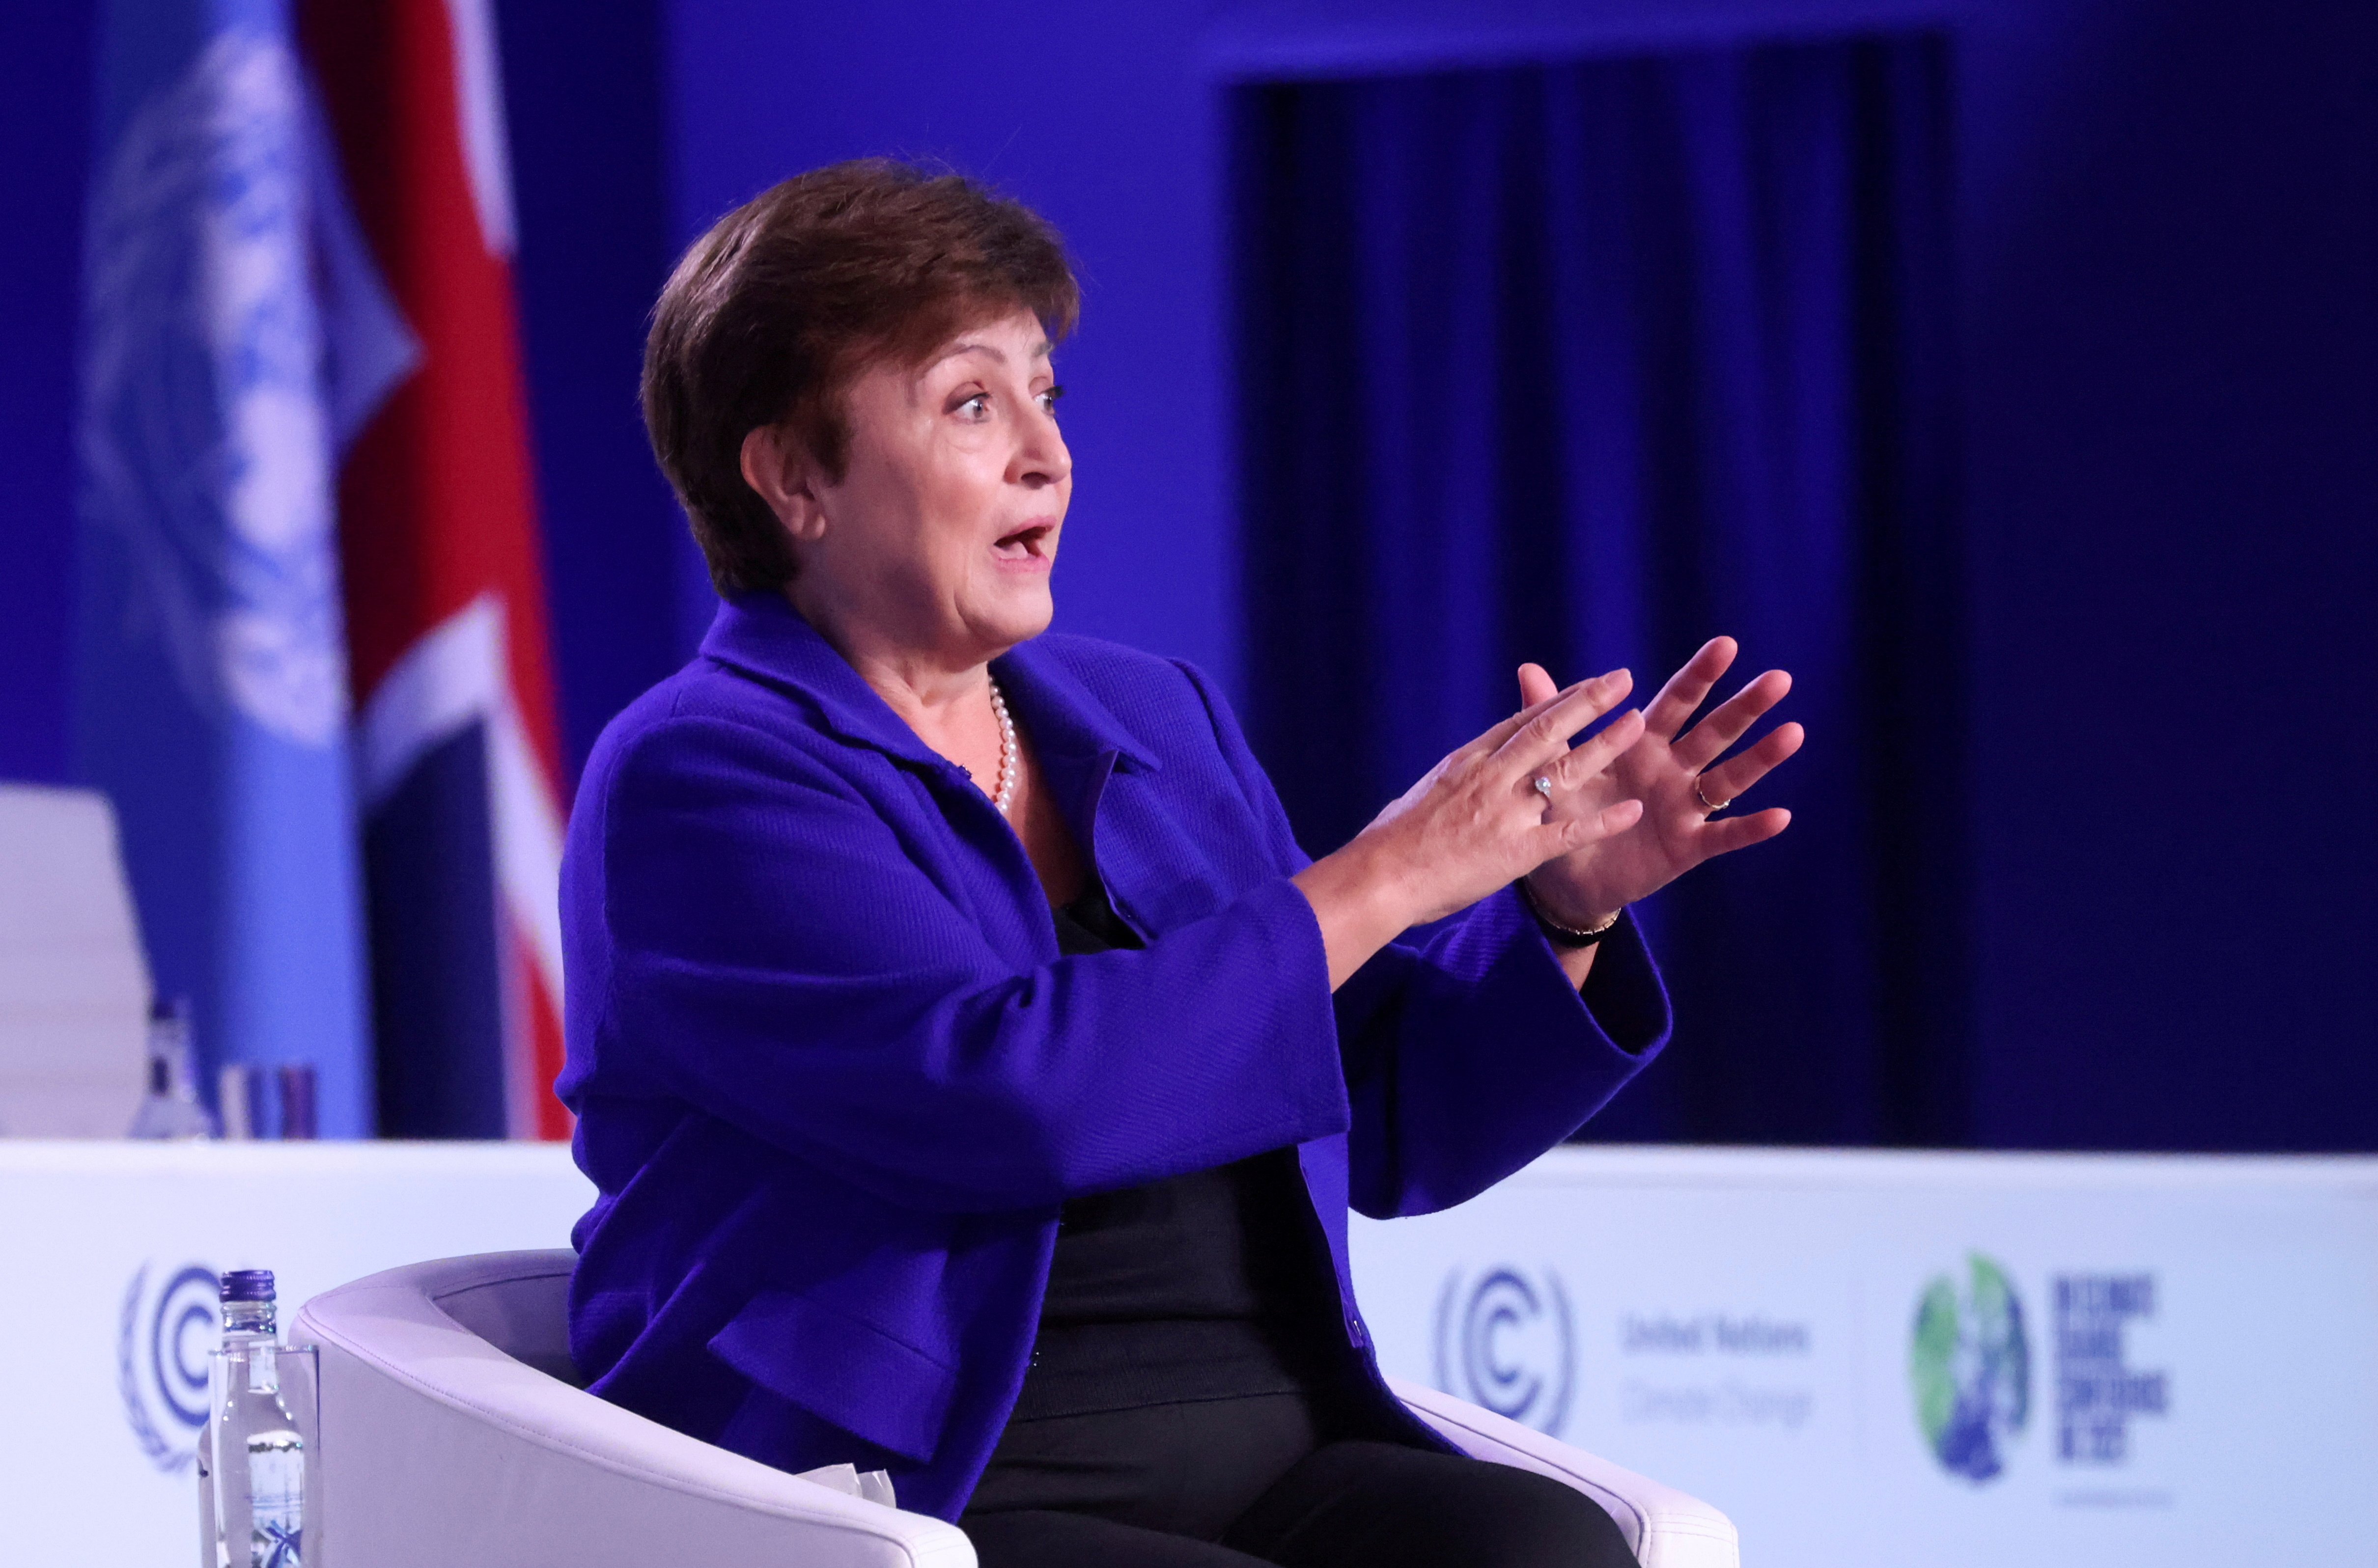   International Monetary Fund (IMF) Managing Director Kristalina Georgieva attends the UN Climate Change Conference (COP26) in Glasgow, Scotland, Britain, November 3, 2021. REUTERS/Yves Herman/File Photo